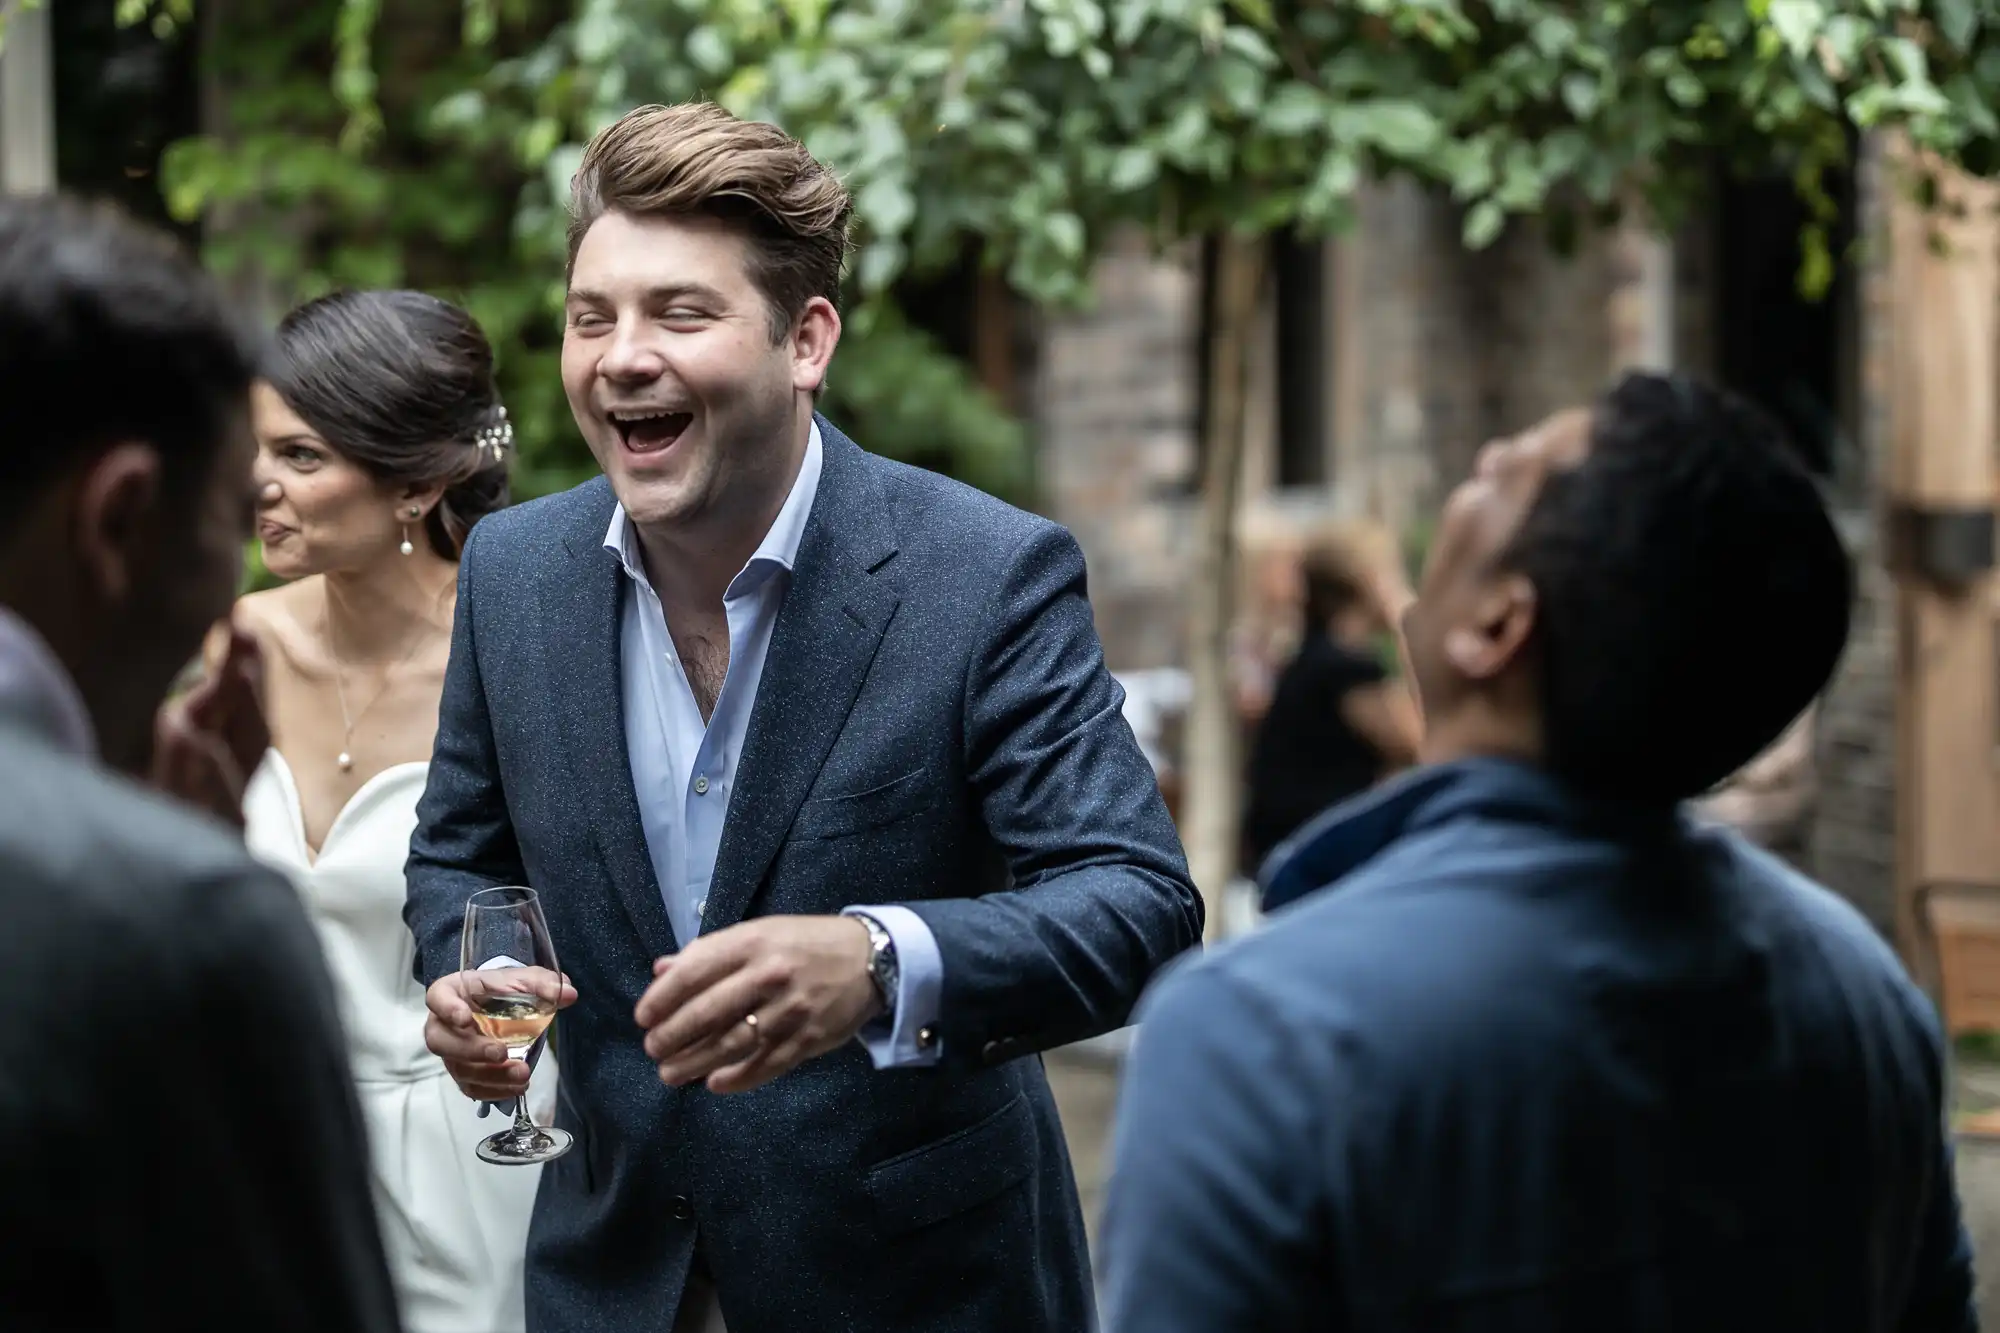 A man in a suit laughs joyfully while holding a wine glass at an outdoor wedding, with guests around him.